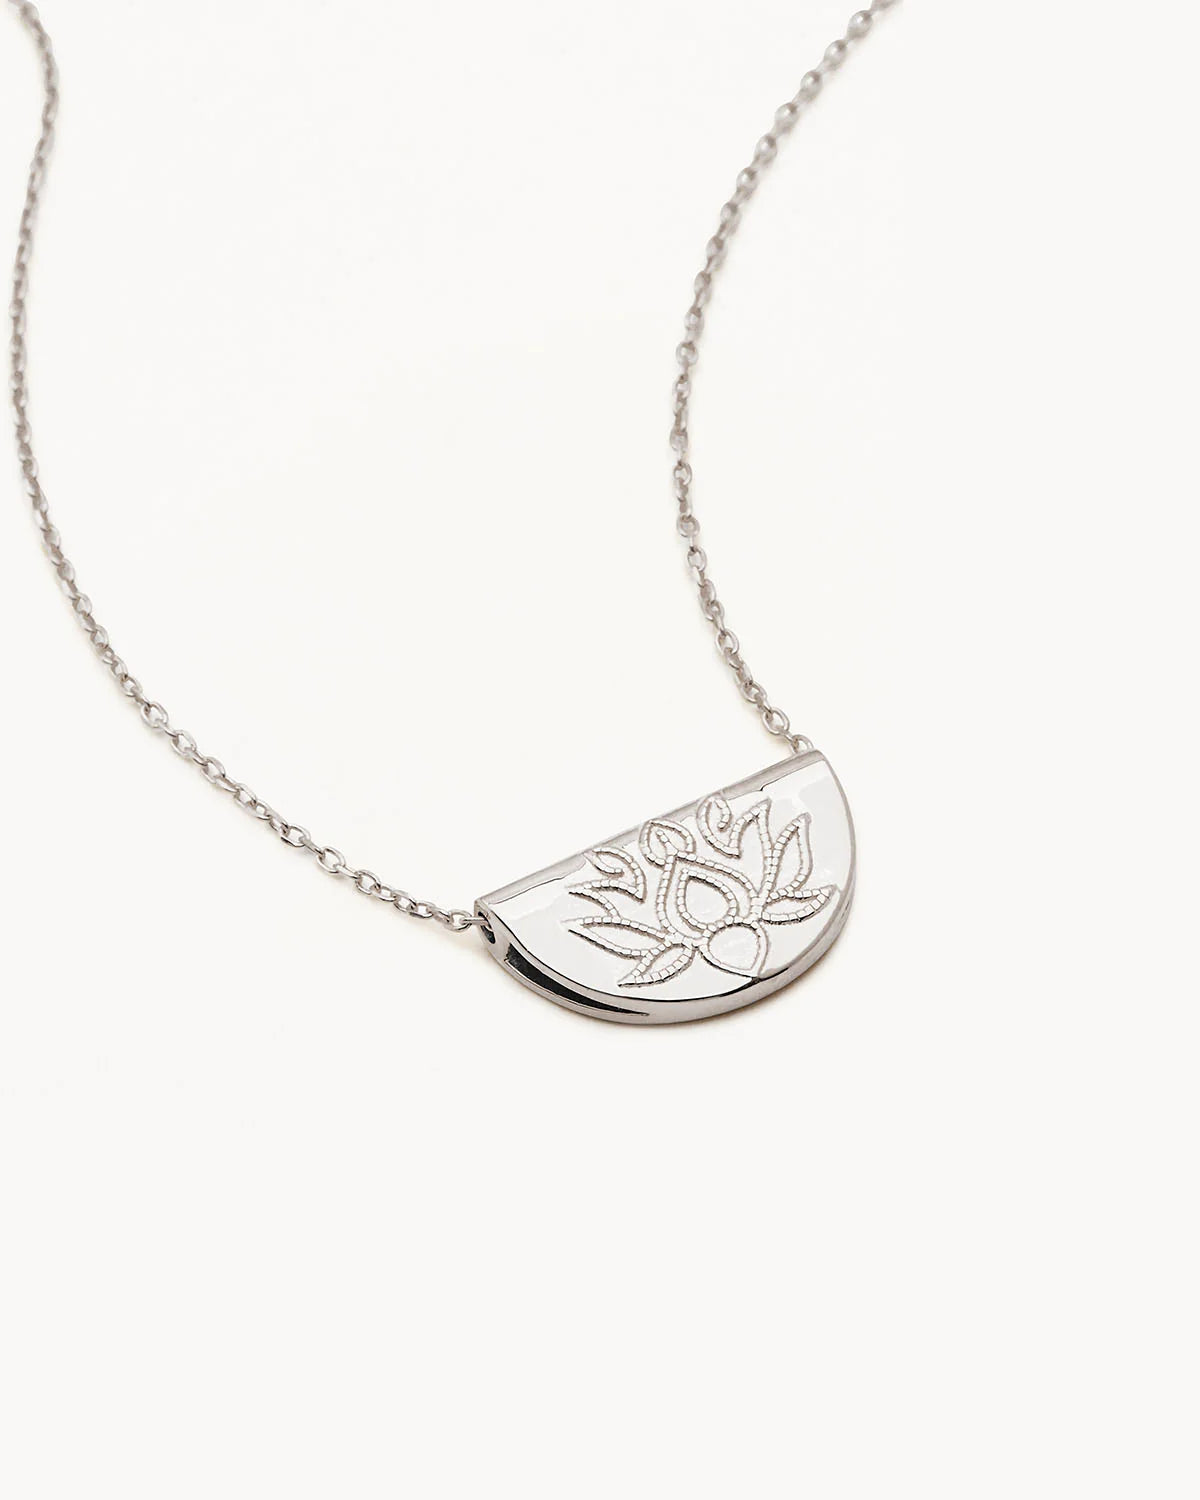 LOTUS SHORT NECKLACE - STERLING SILVER